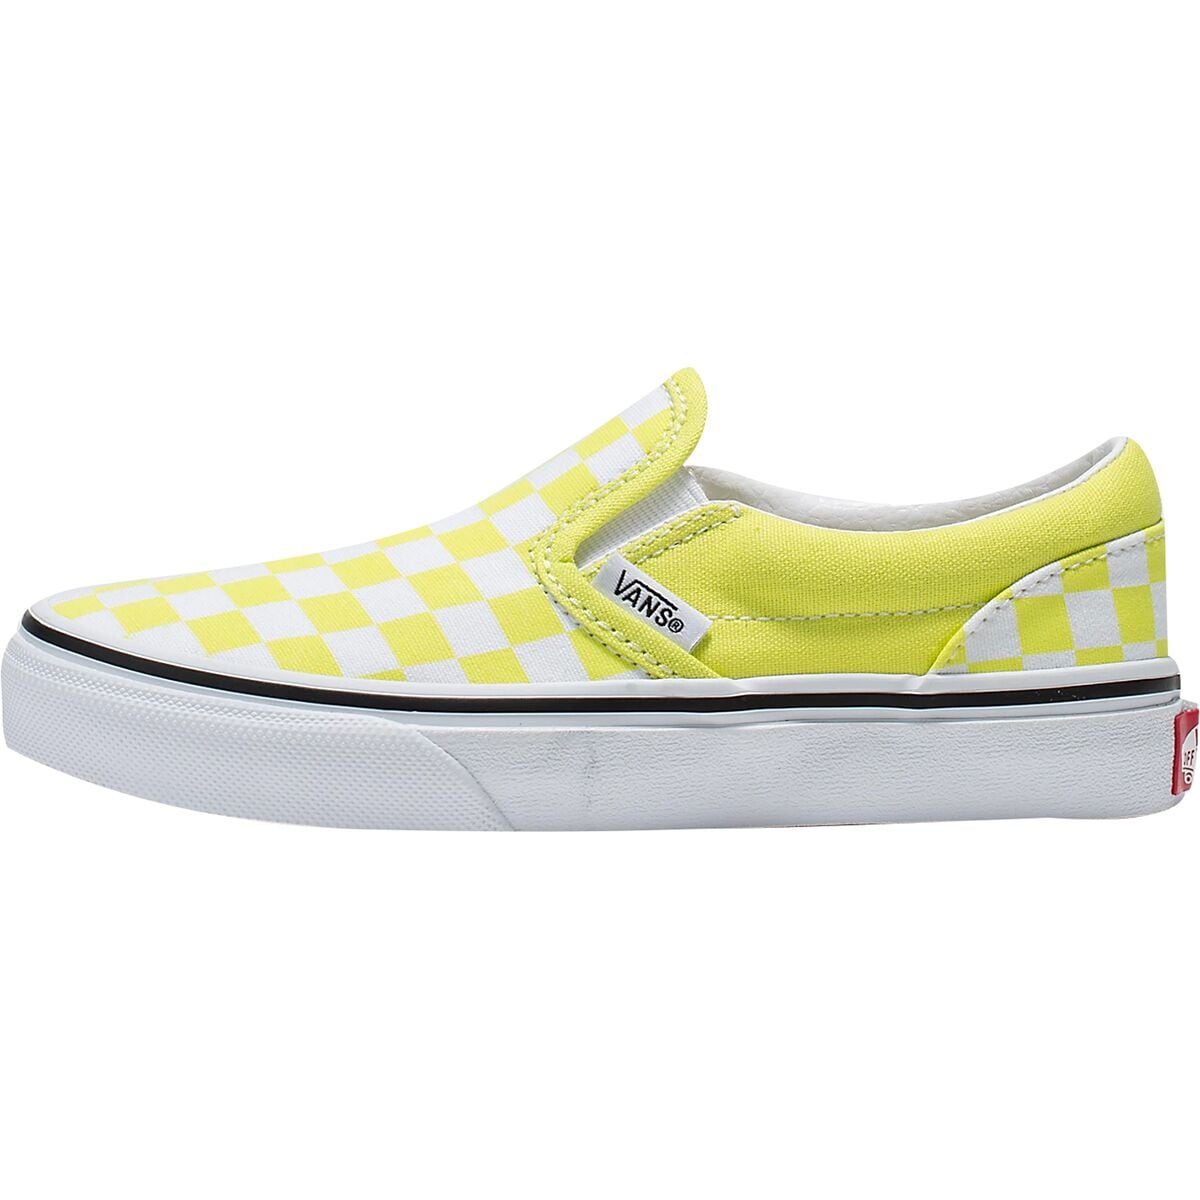 Classic Slip-On Checkerboard Shoe - Kids' by Vans | US-Parks.com